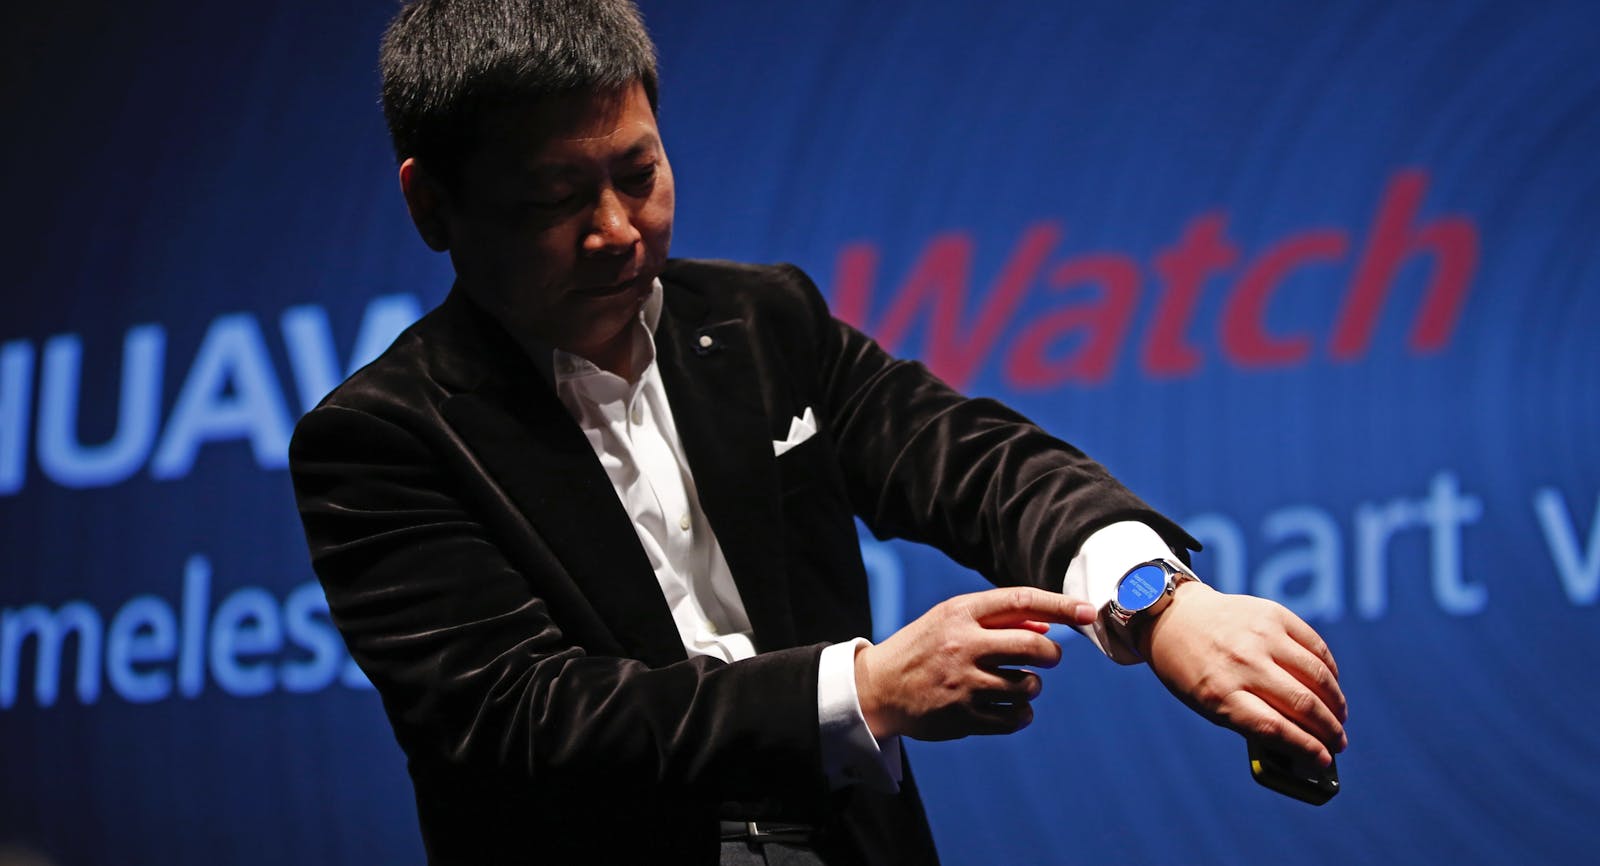 Huawei device group head Richard Yu with the smartwatch. Photo by Bloomberg.